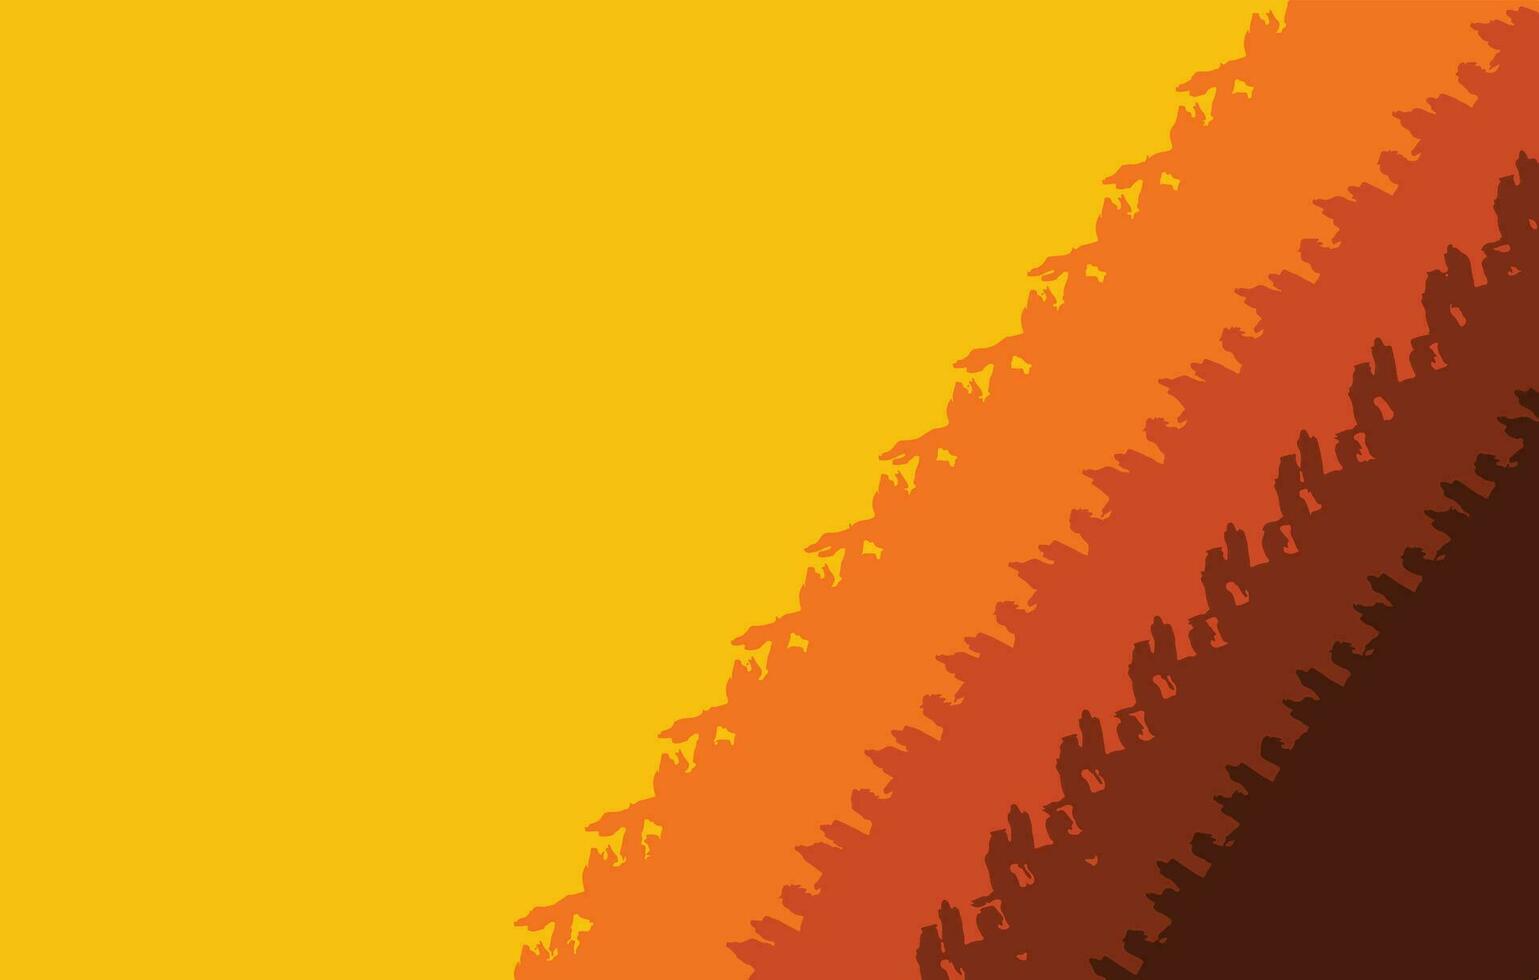 Yellow, orange, red, and brown abstract brush stroke vector background isolated on horizontal ratio template. Simple flat wallpaper with empty copy space.